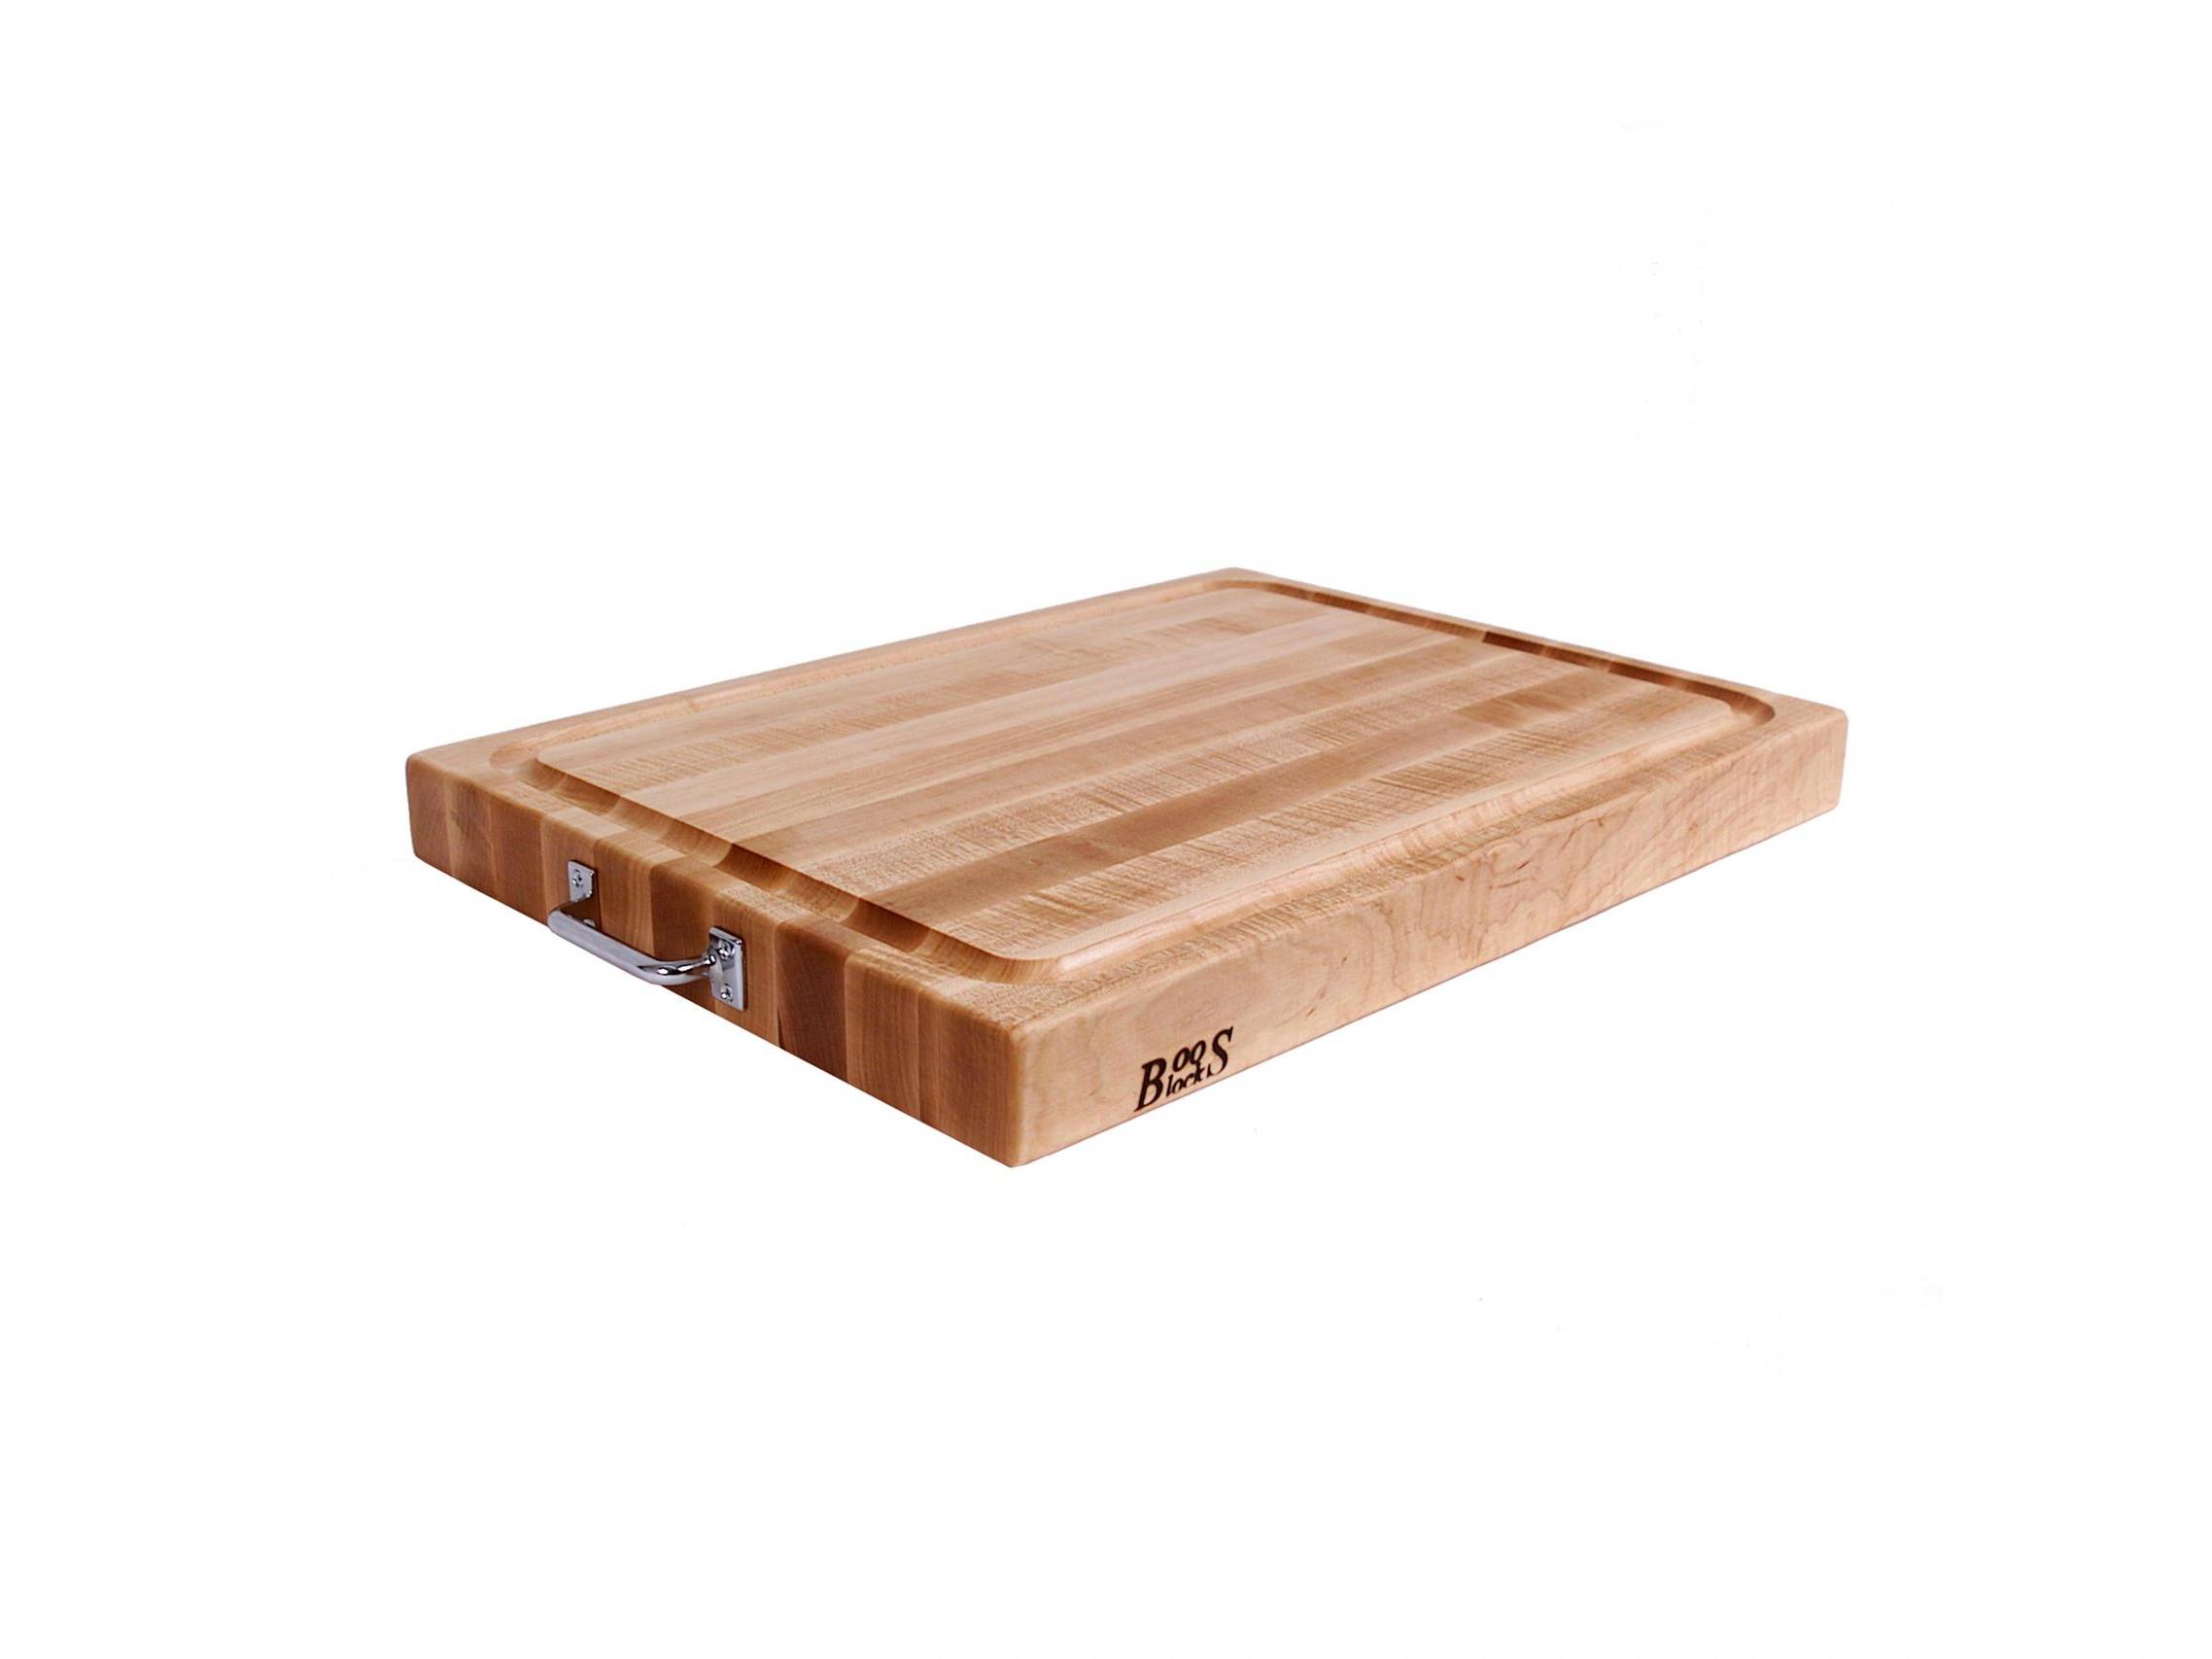 Prep-N-Serve Hard Maple Cutting Board with Juice Groove, Stainless Steel Handles; Can Be Used on Both Sides 33